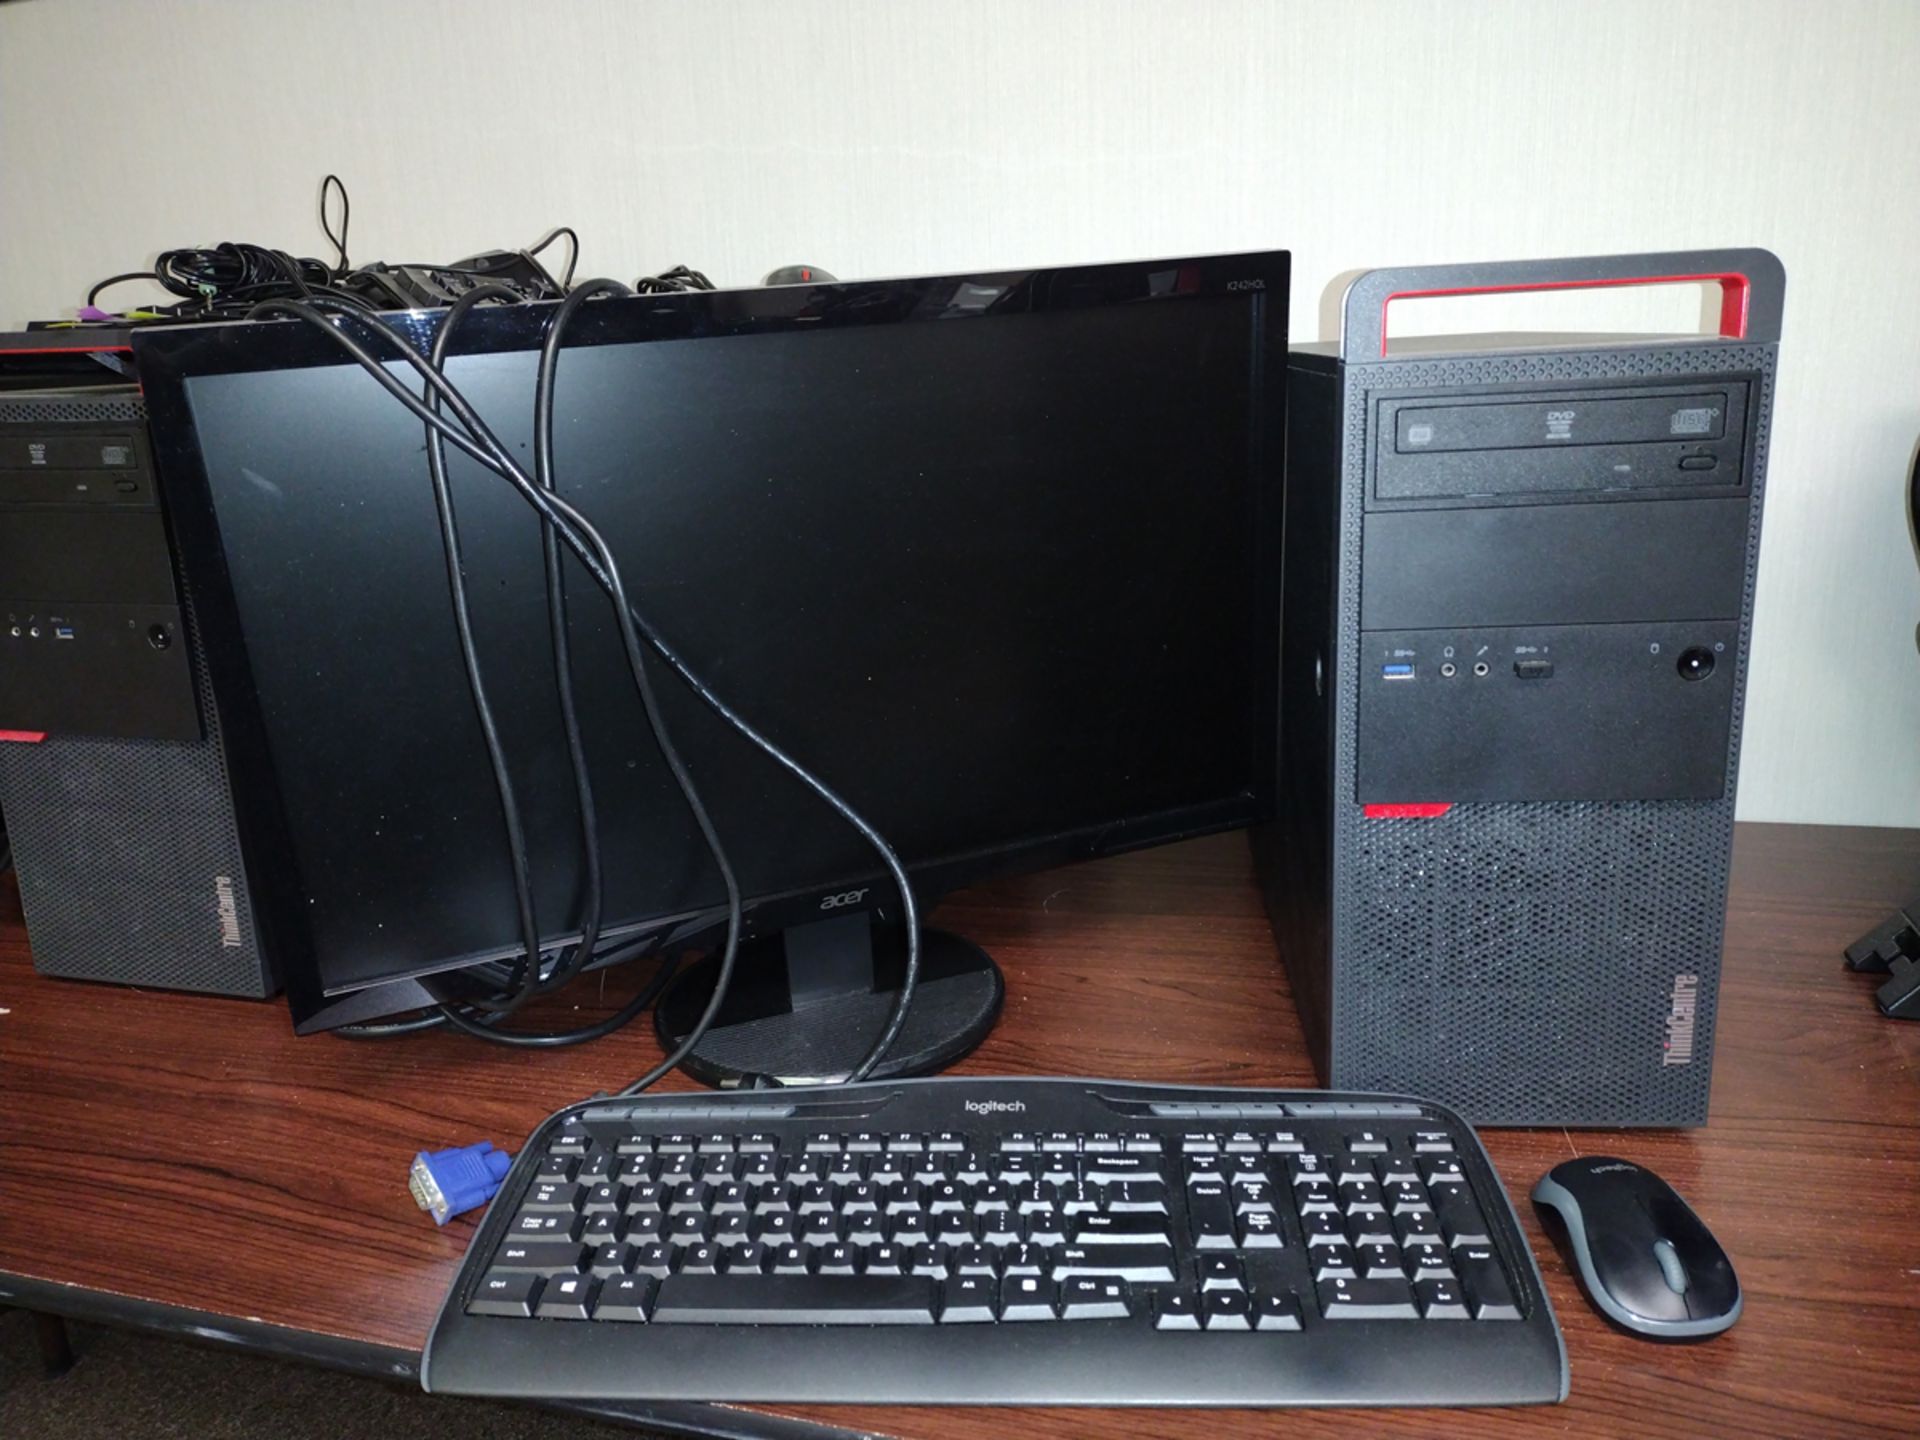 Lenovo M800 ThinkCentre i5 PC w/ Monitor and Keyboard